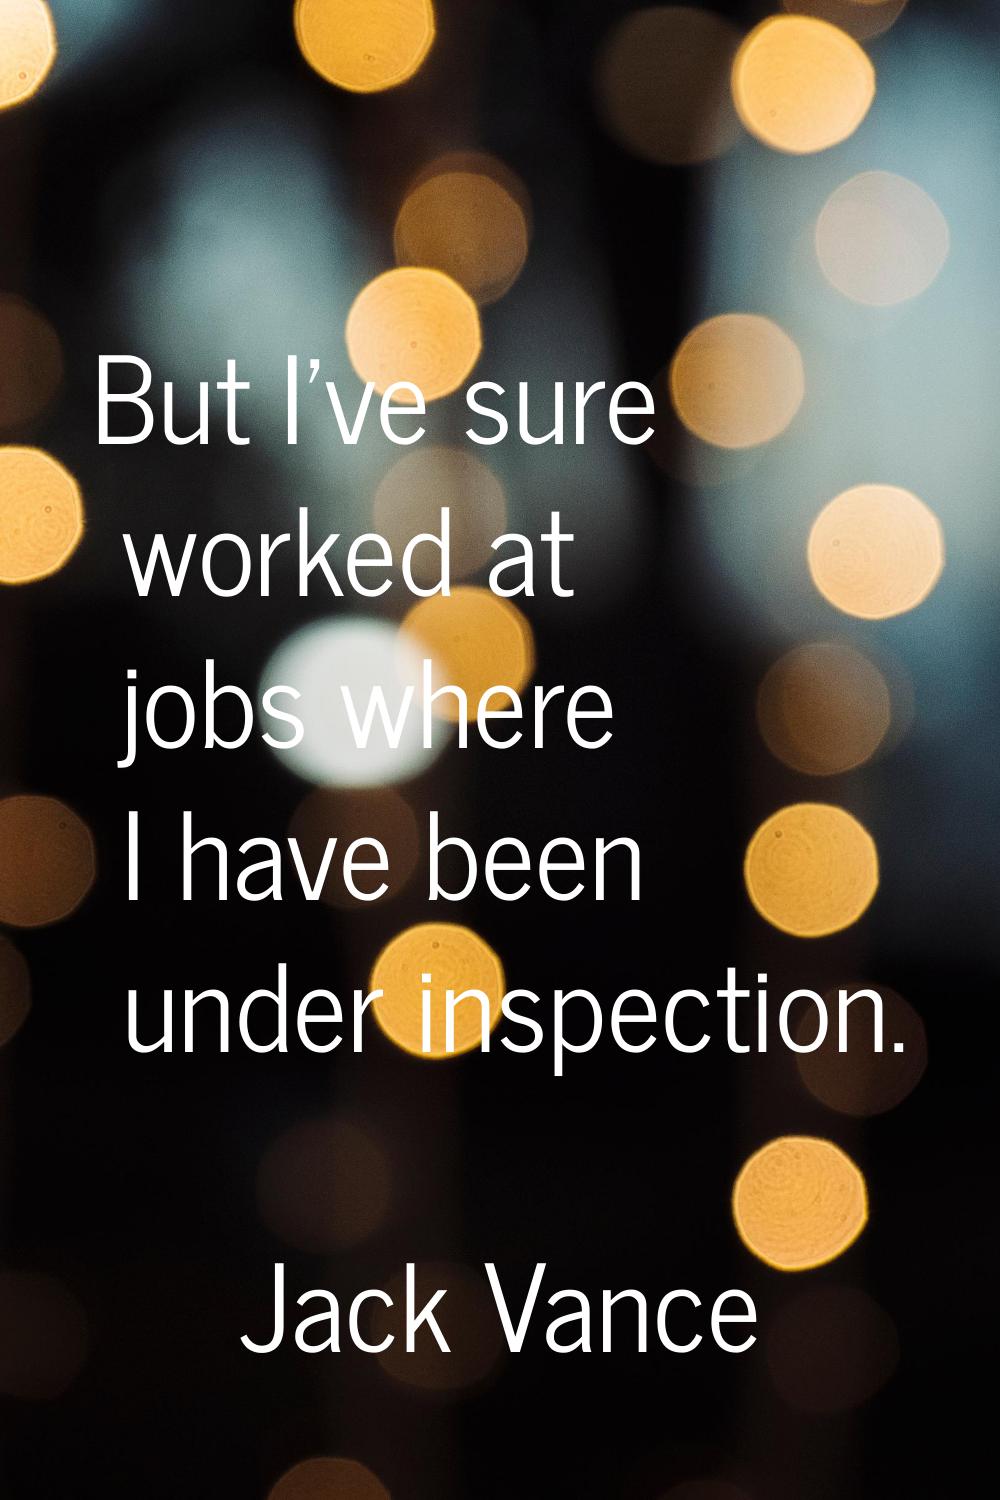 But I've sure worked at jobs where I have been under inspection.